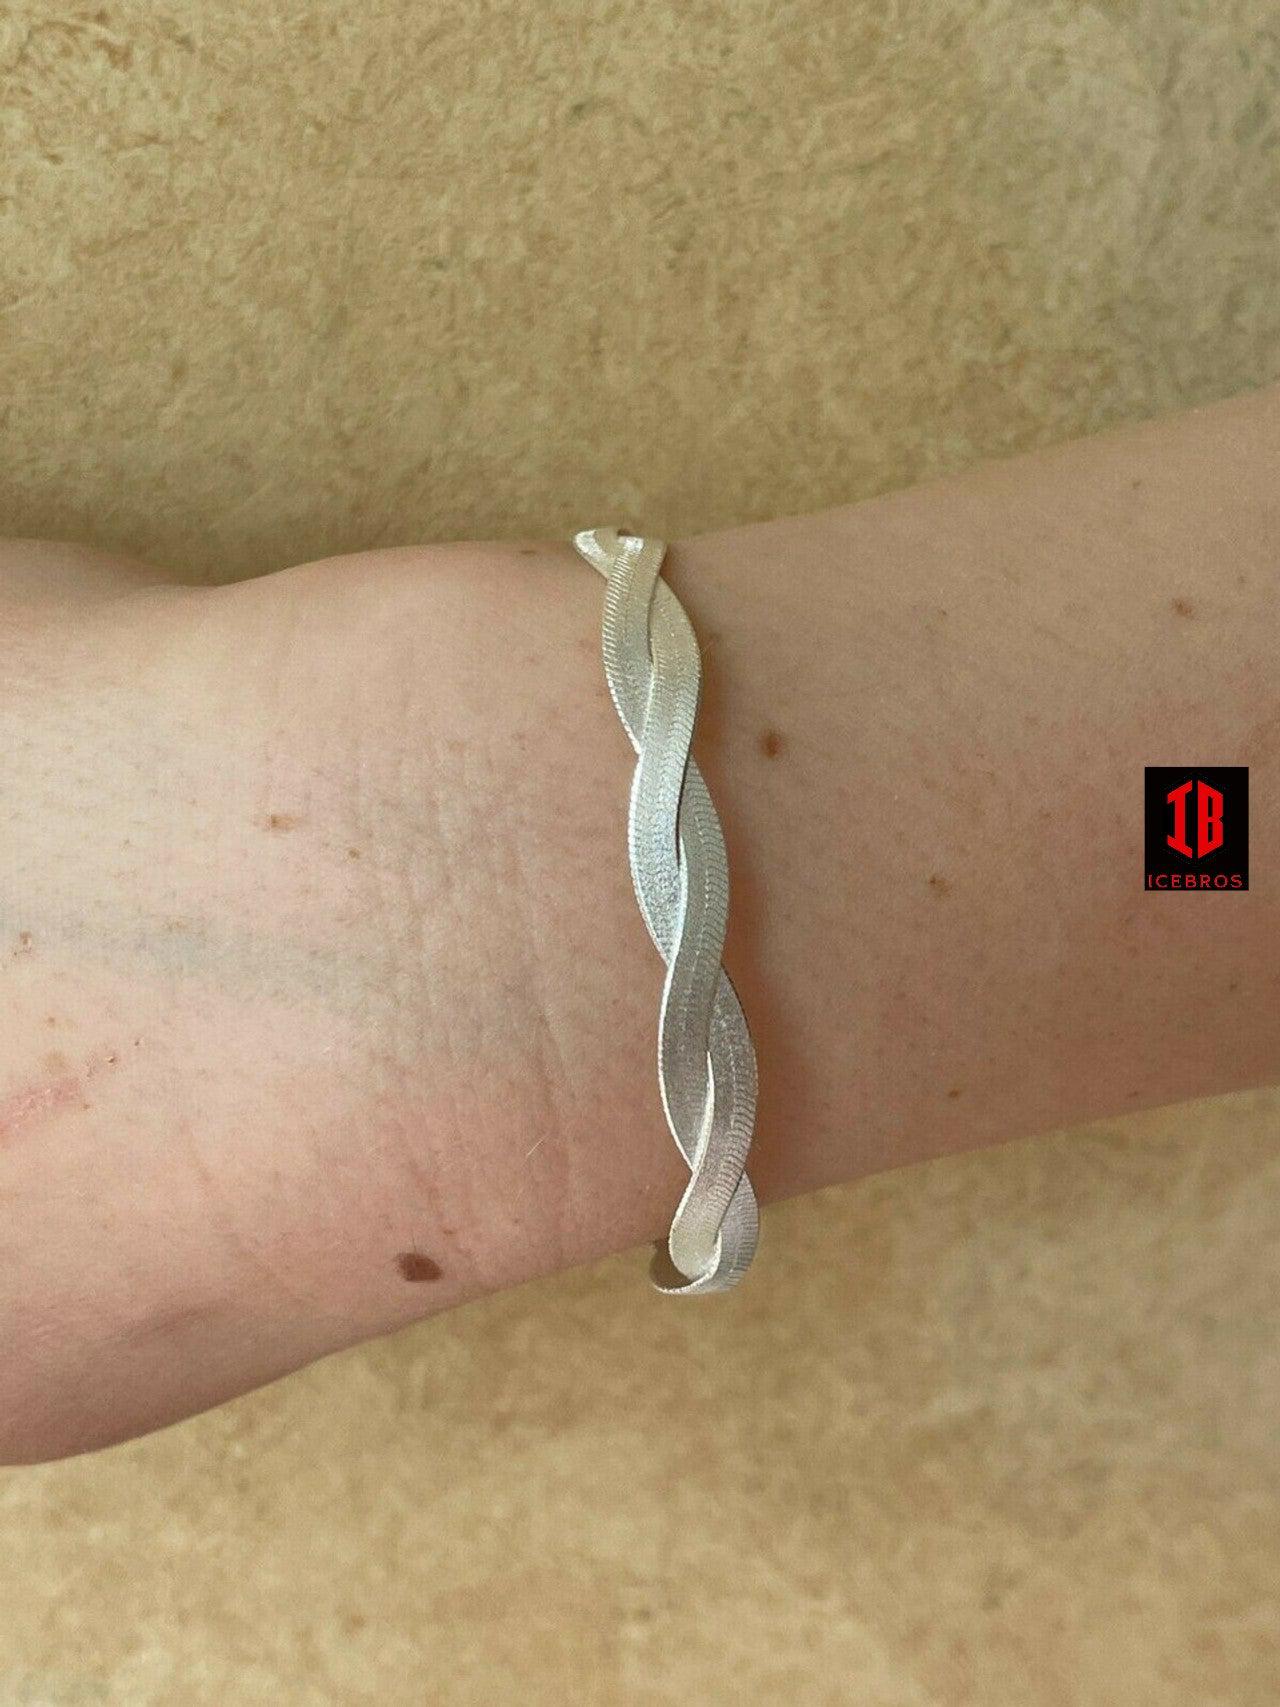 WHITE Gold Over Solid 925 Silver Twisted Braided Herringbone Bracelet 6" - 8.5"